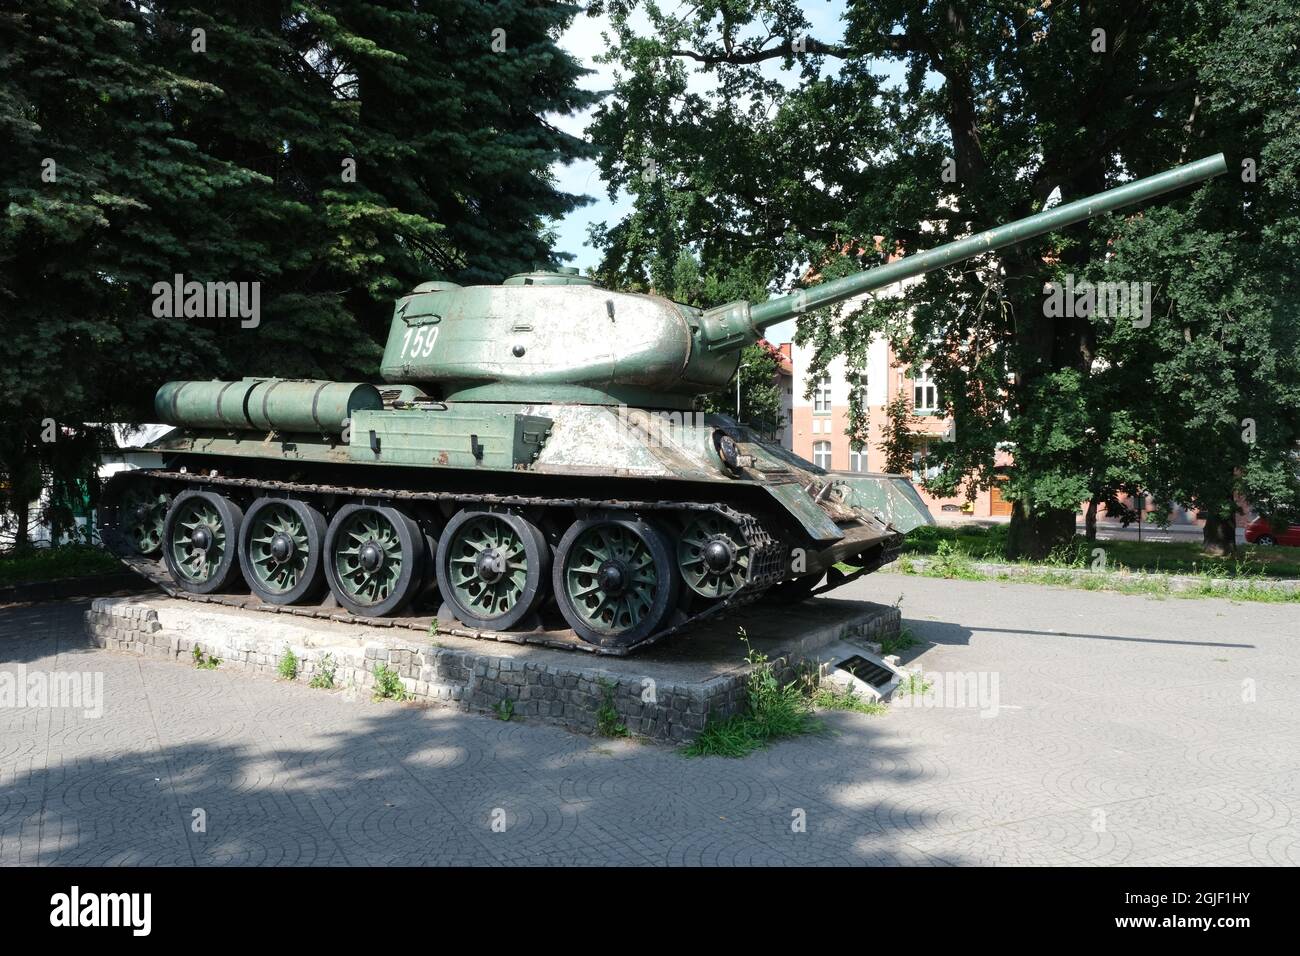 Elblag, Poland - July 21, 2021: This Soviet T-34 85 tank is standing in a park in Elblag to commemorates the battle between the Red Army and Germans Stock Photo